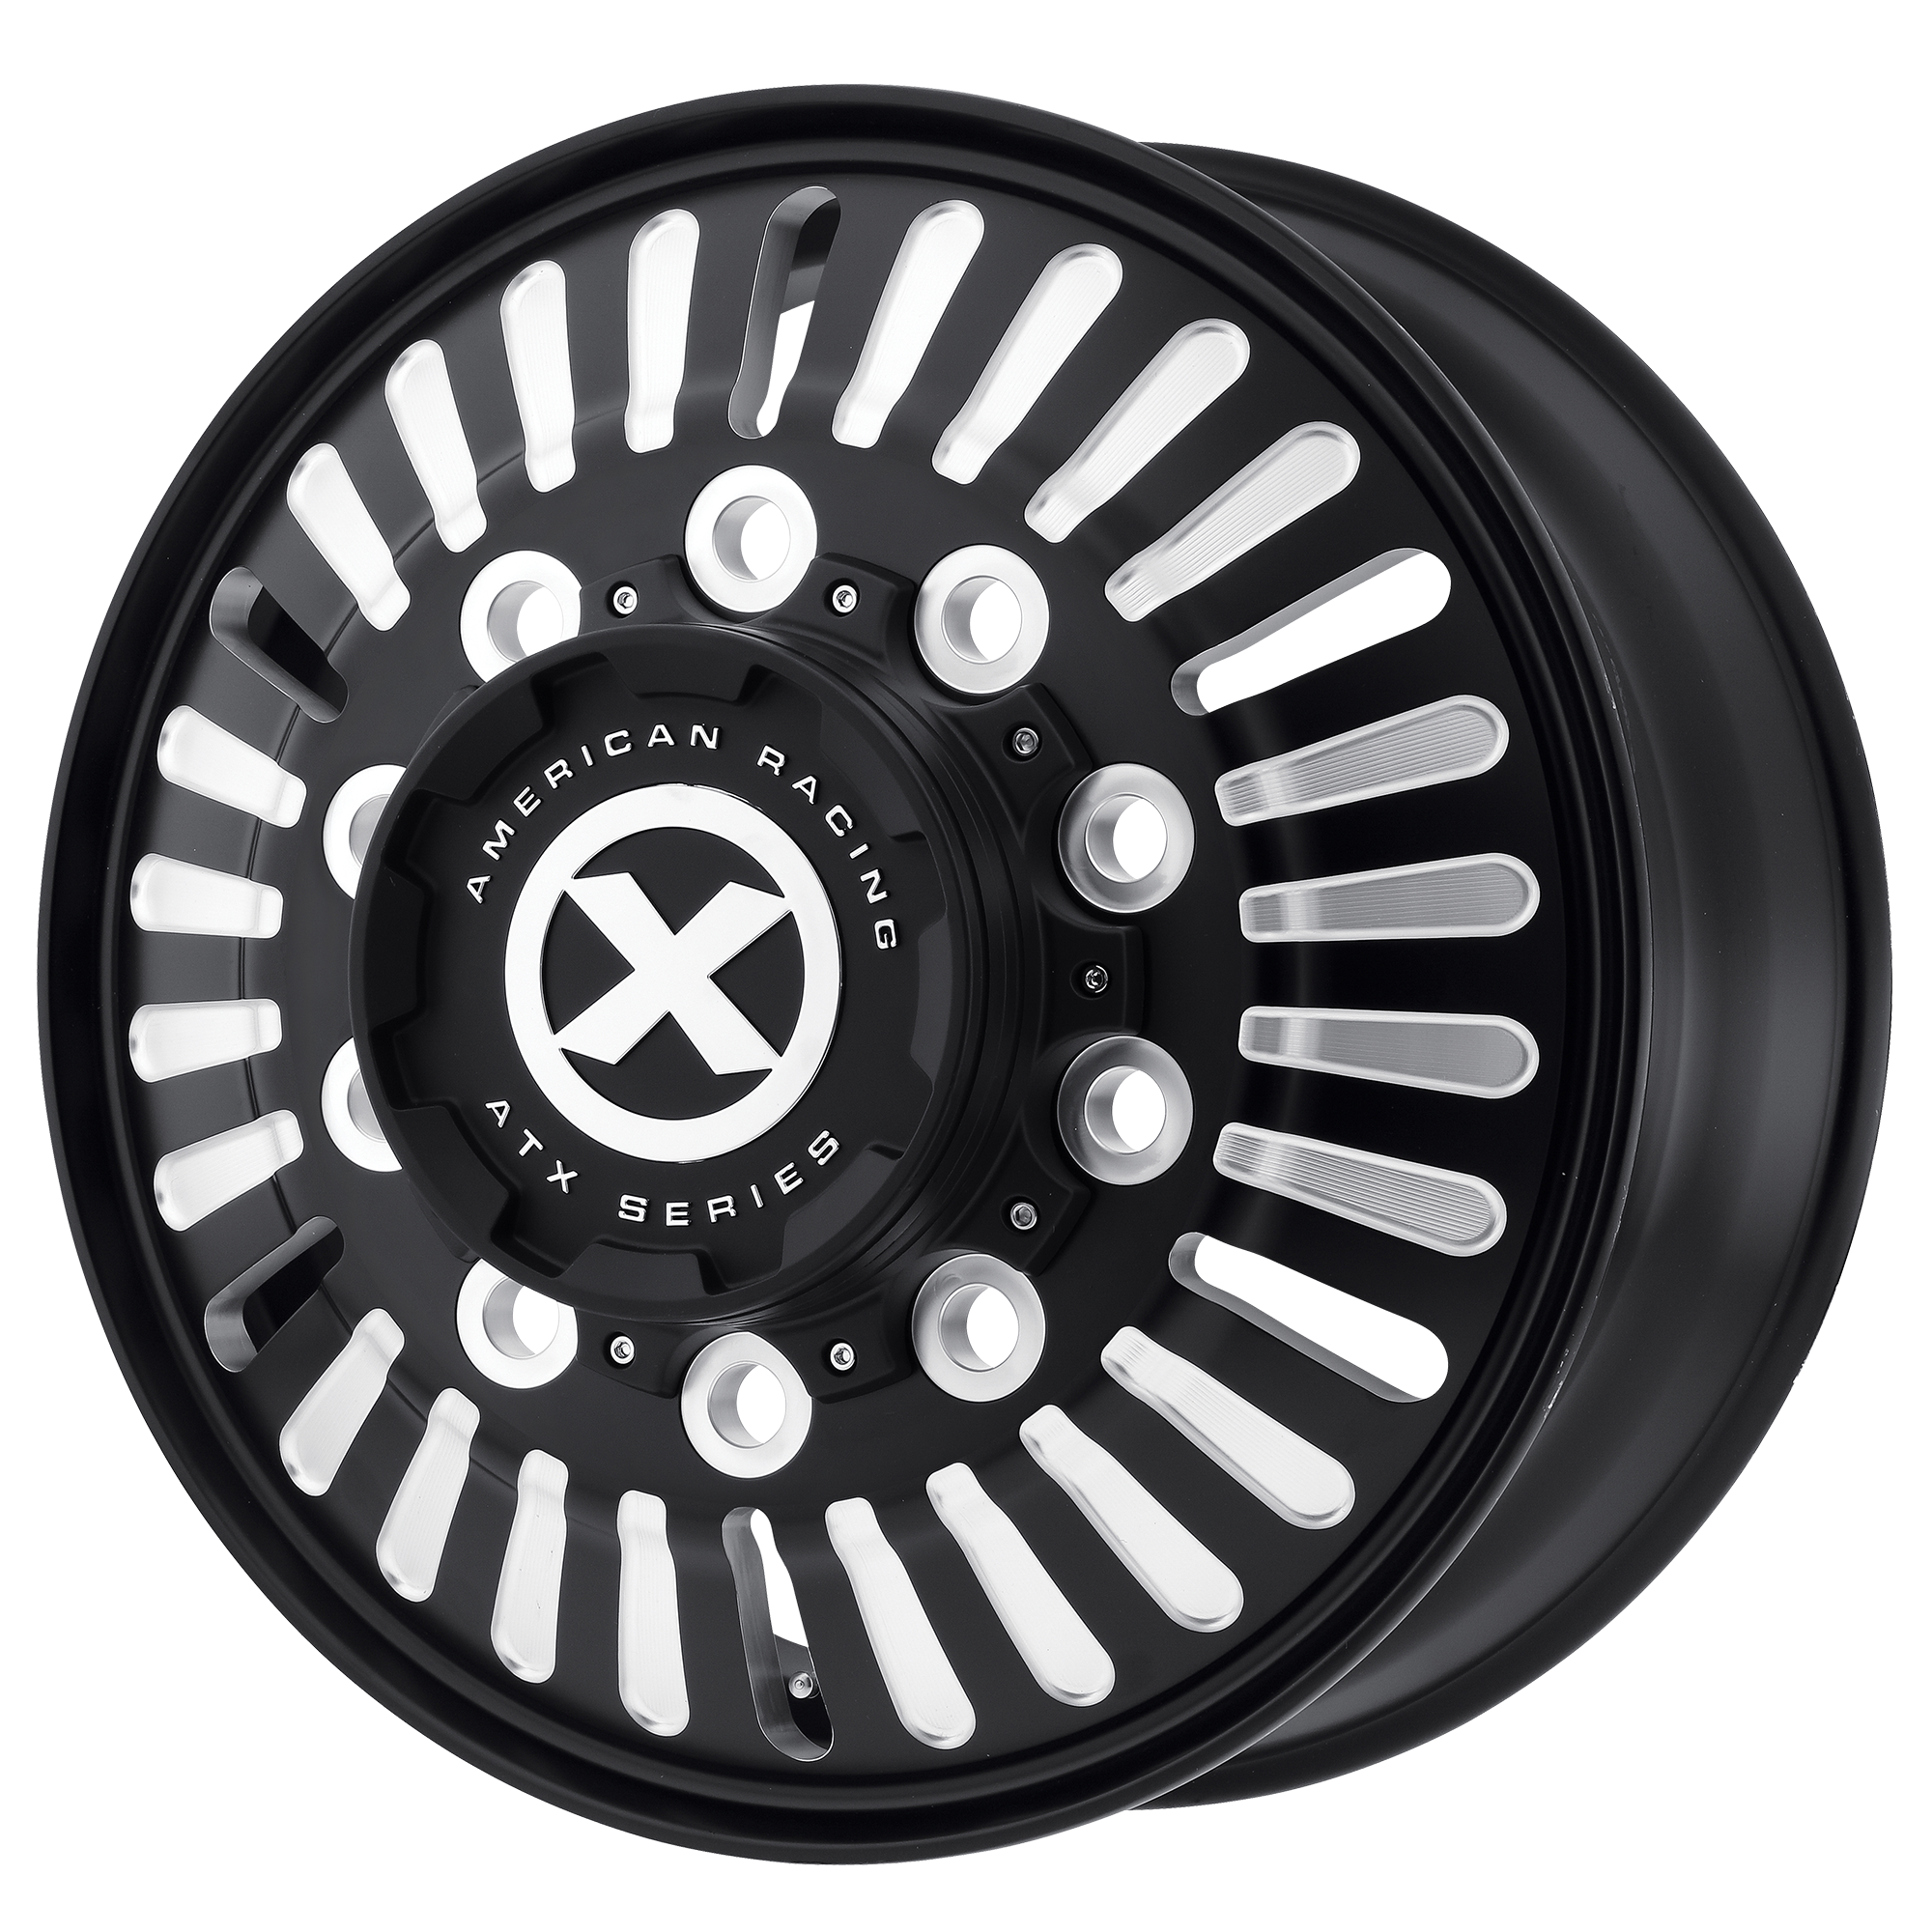 ATX AO403 ROULETTE 24.5X8.25 144 10X285.75/10X11.25 Satin Black Milled - Front